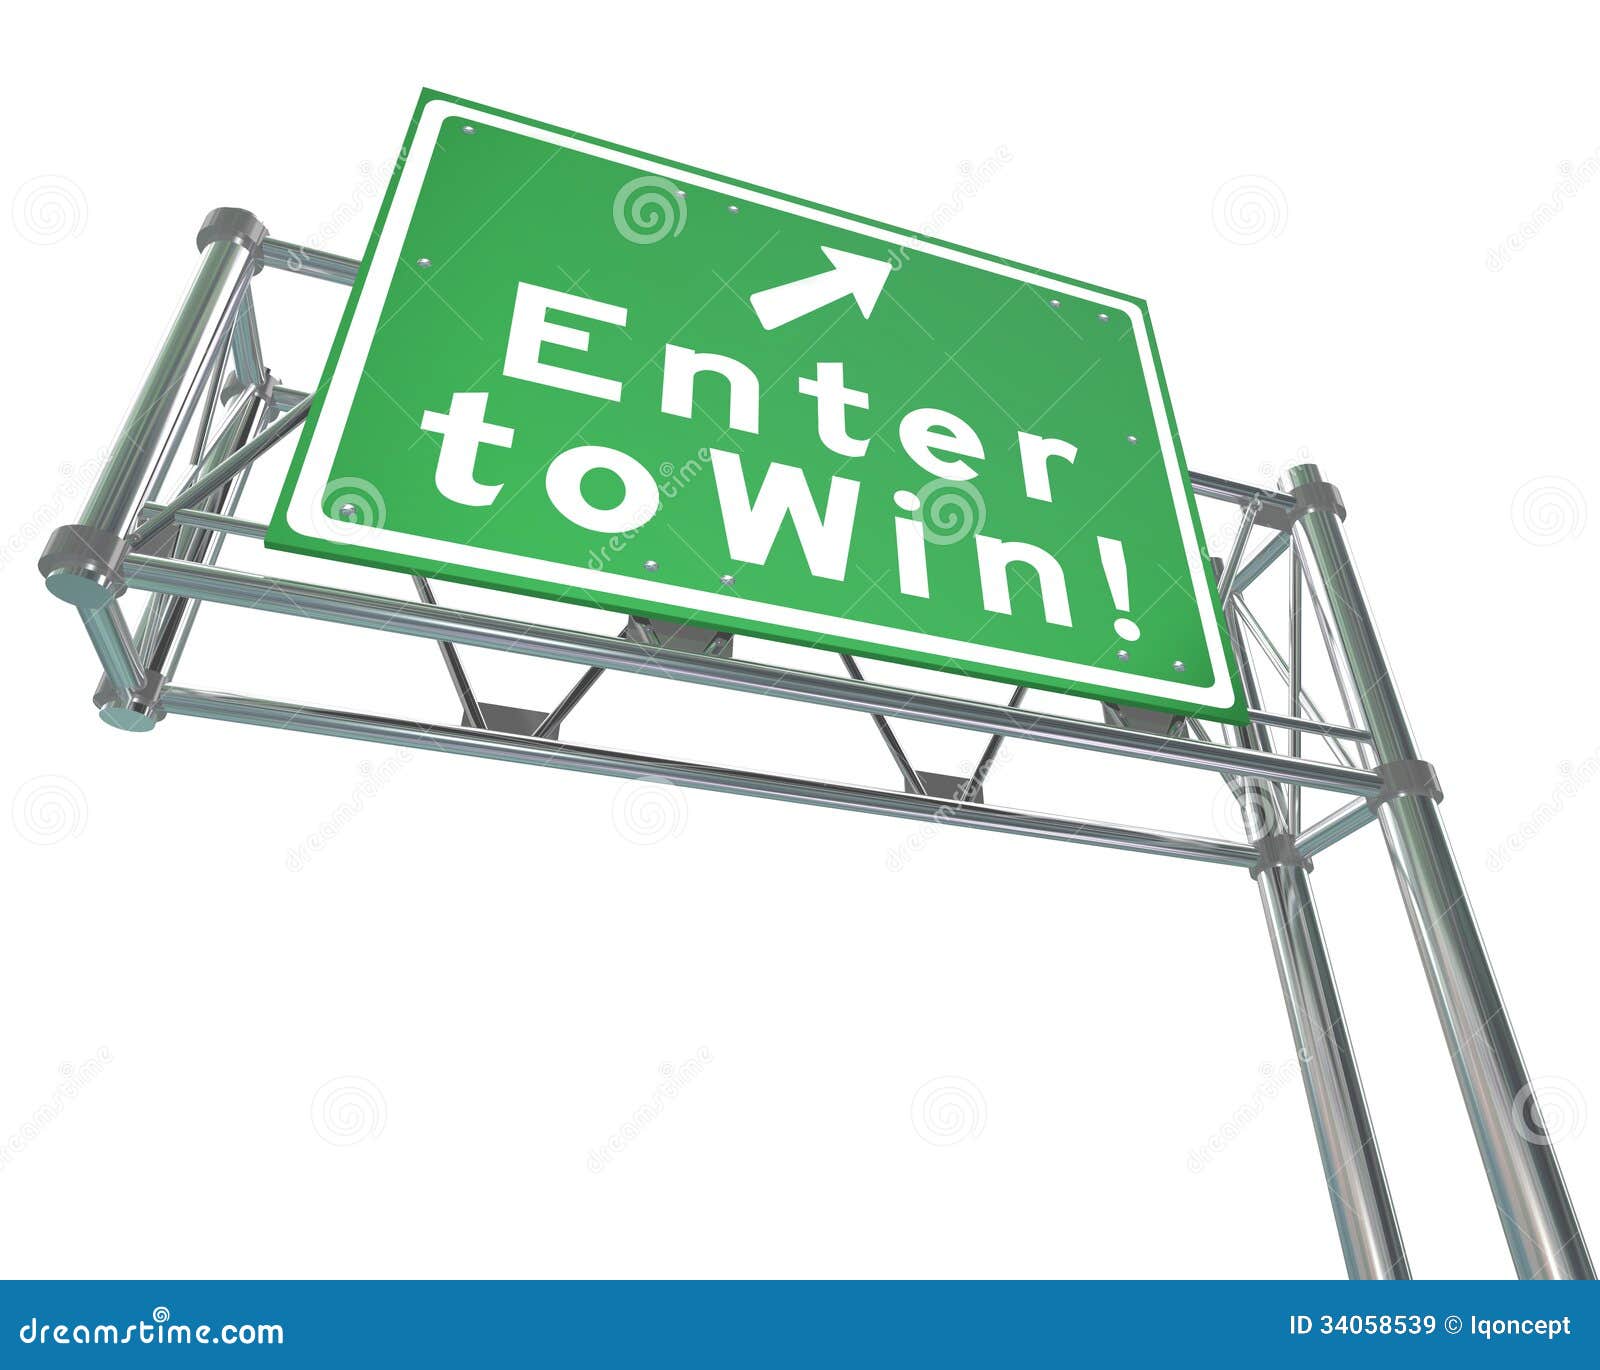 enter-to-win-words-green-freeway-sign-road-illustrate-buying-tickets-lottery-betting-casino-other-34058539.jpg